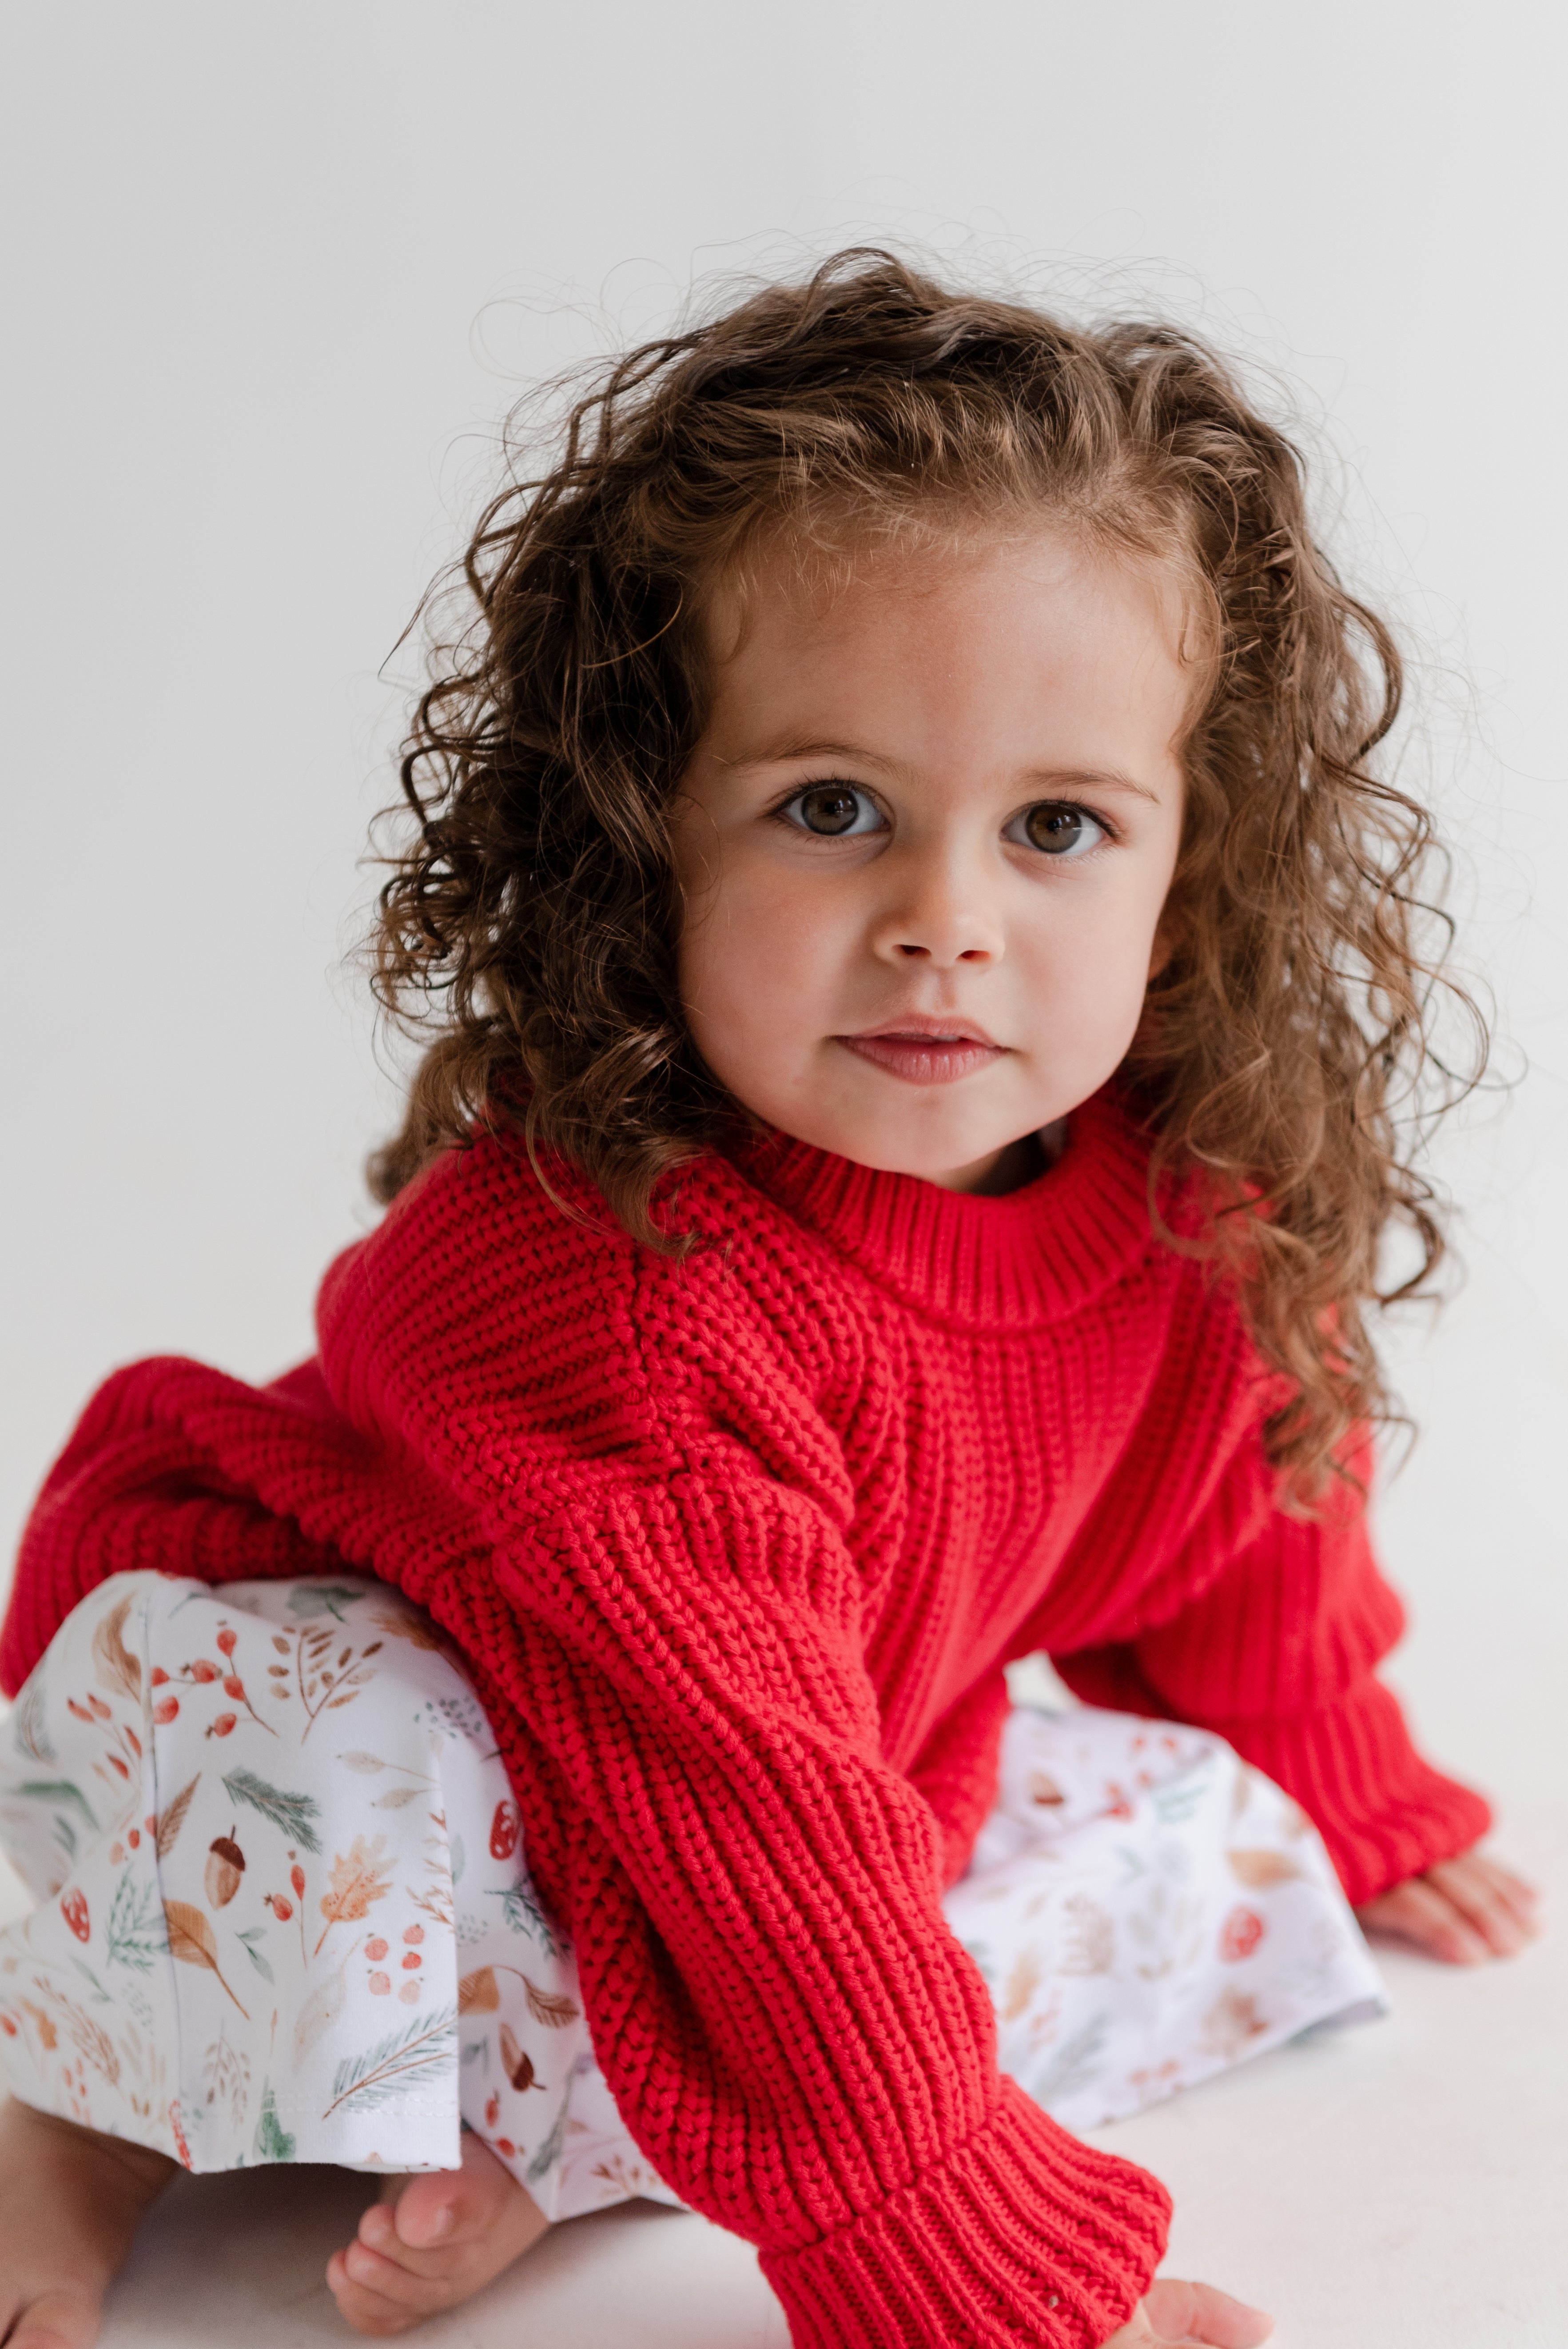 Oversized Red Knitted Jumper